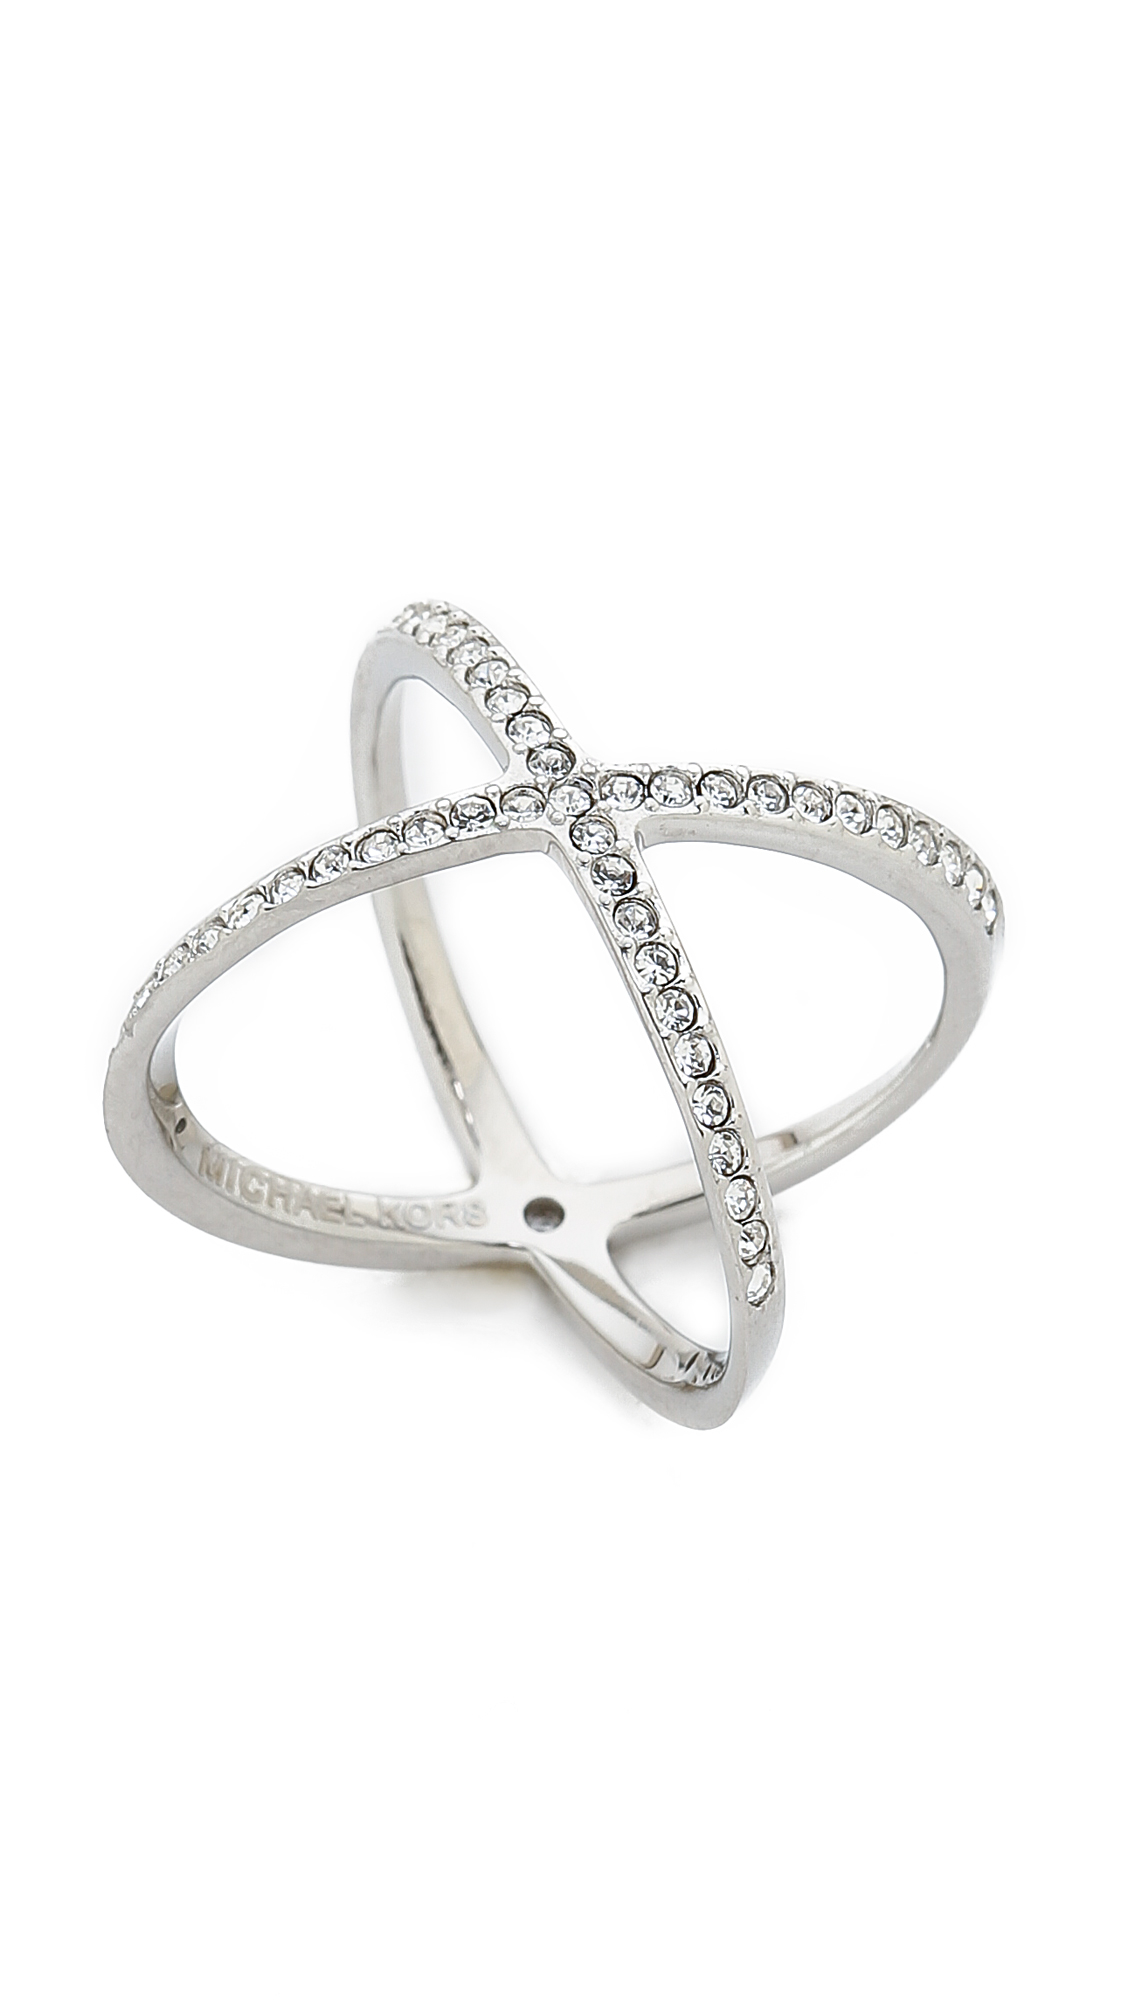 Michael Kors Pave X Ring - Silver/Clear in Metallic | Lyst